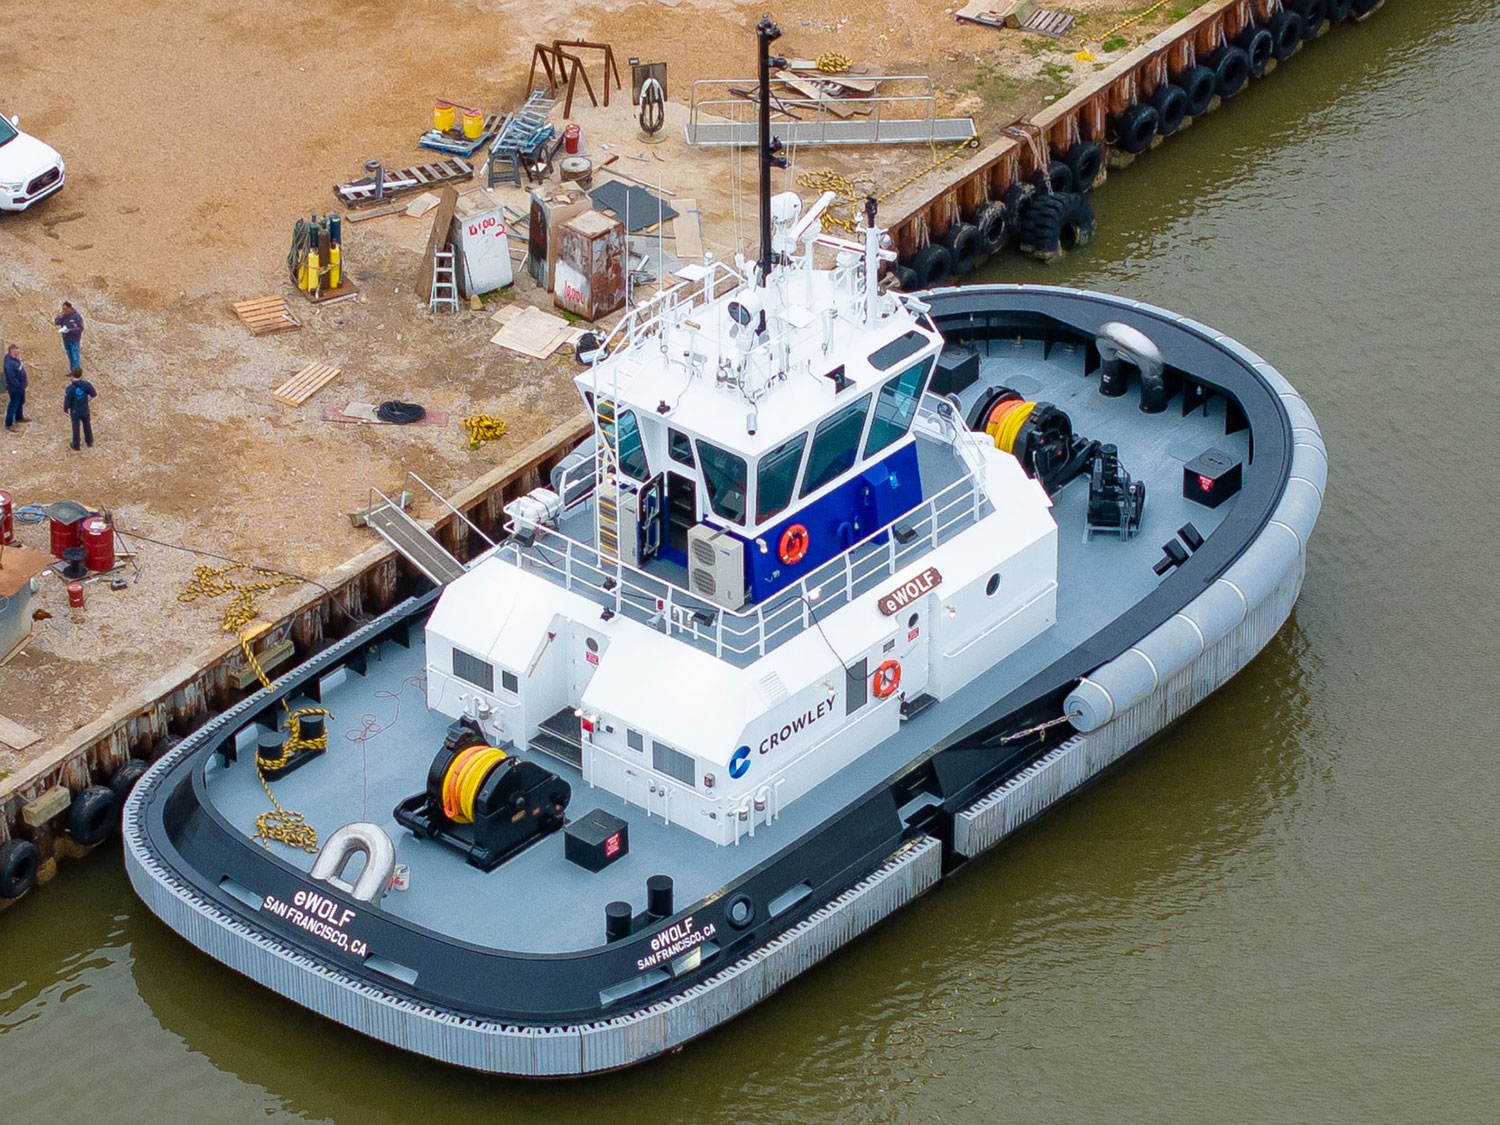 Crowley has accepted delivery of eWolf, the first all-electric, ship assist harbor tugboat in the U.S.